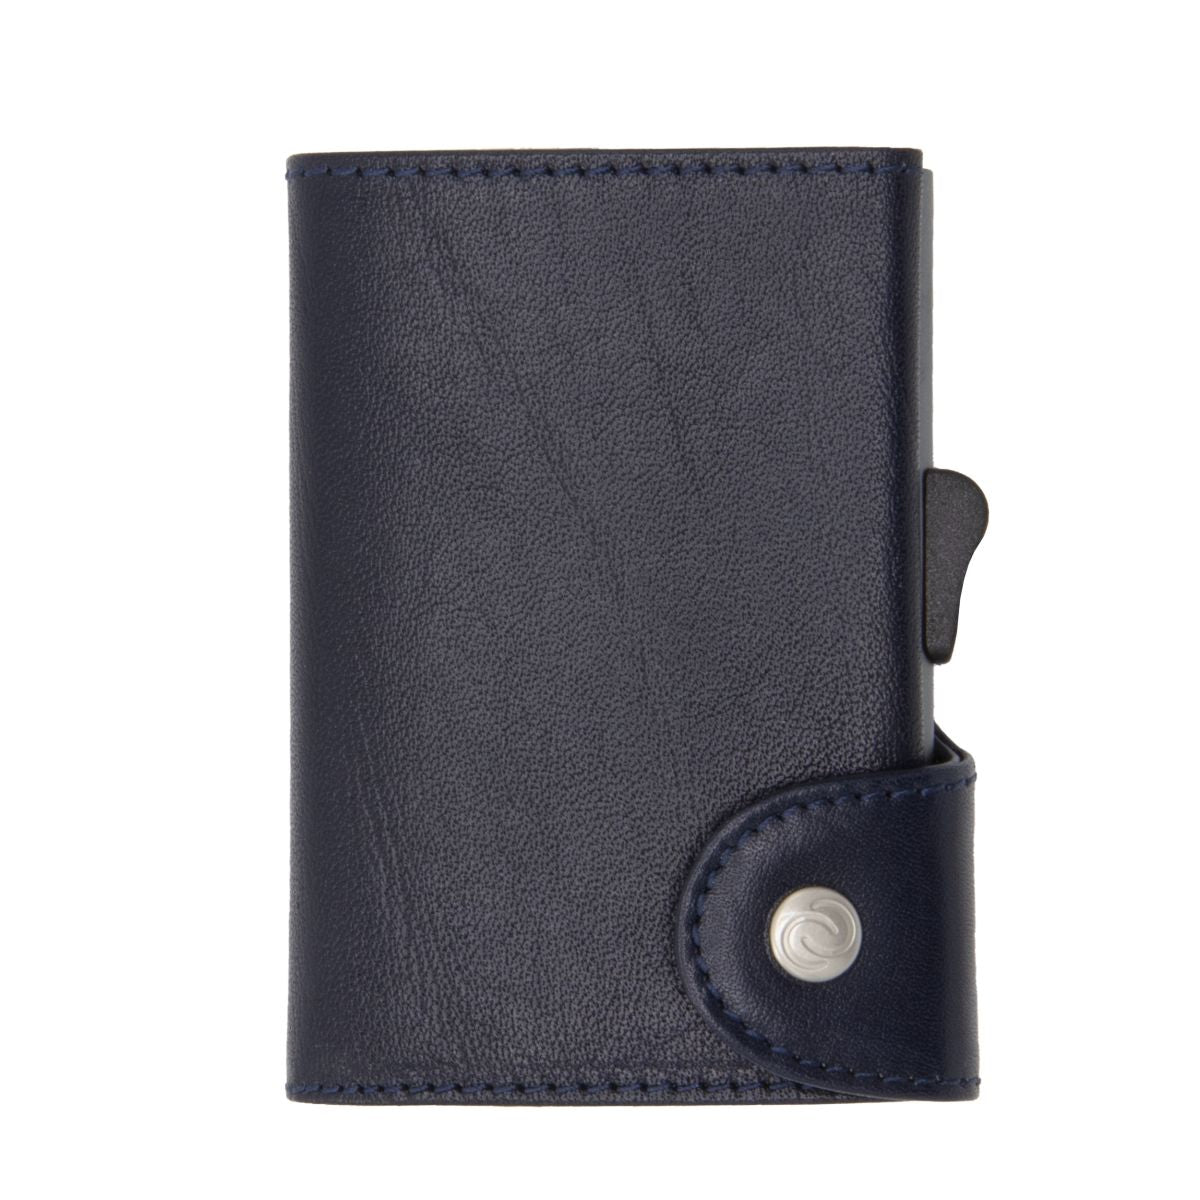 C-Secure XL Aluminum Wallet with Genuine Leather and Coins Pocket - Blue Montana